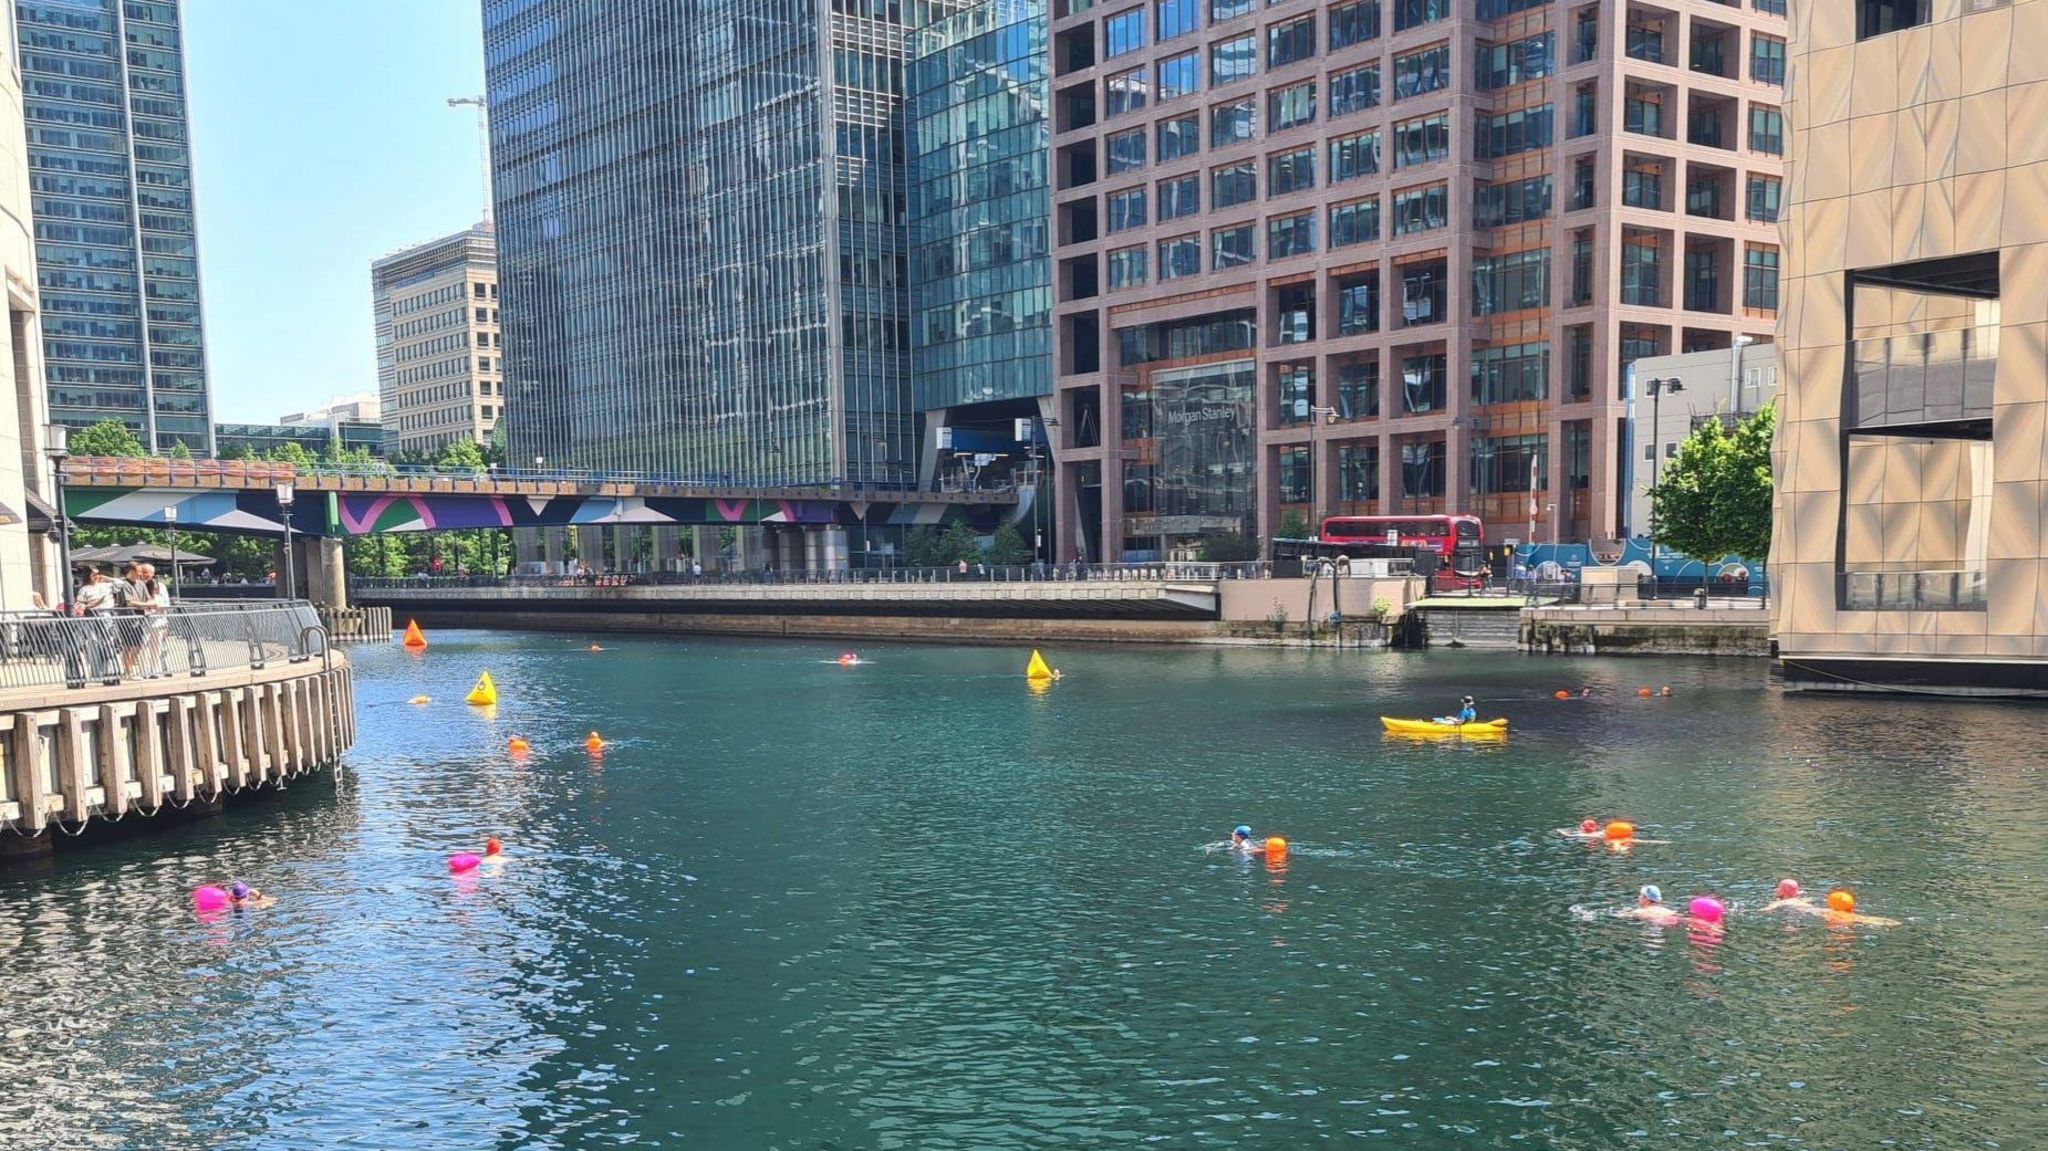 Swimmers in water at Canary Wharf with tall glass-fronted buildings in the background along with a bridge